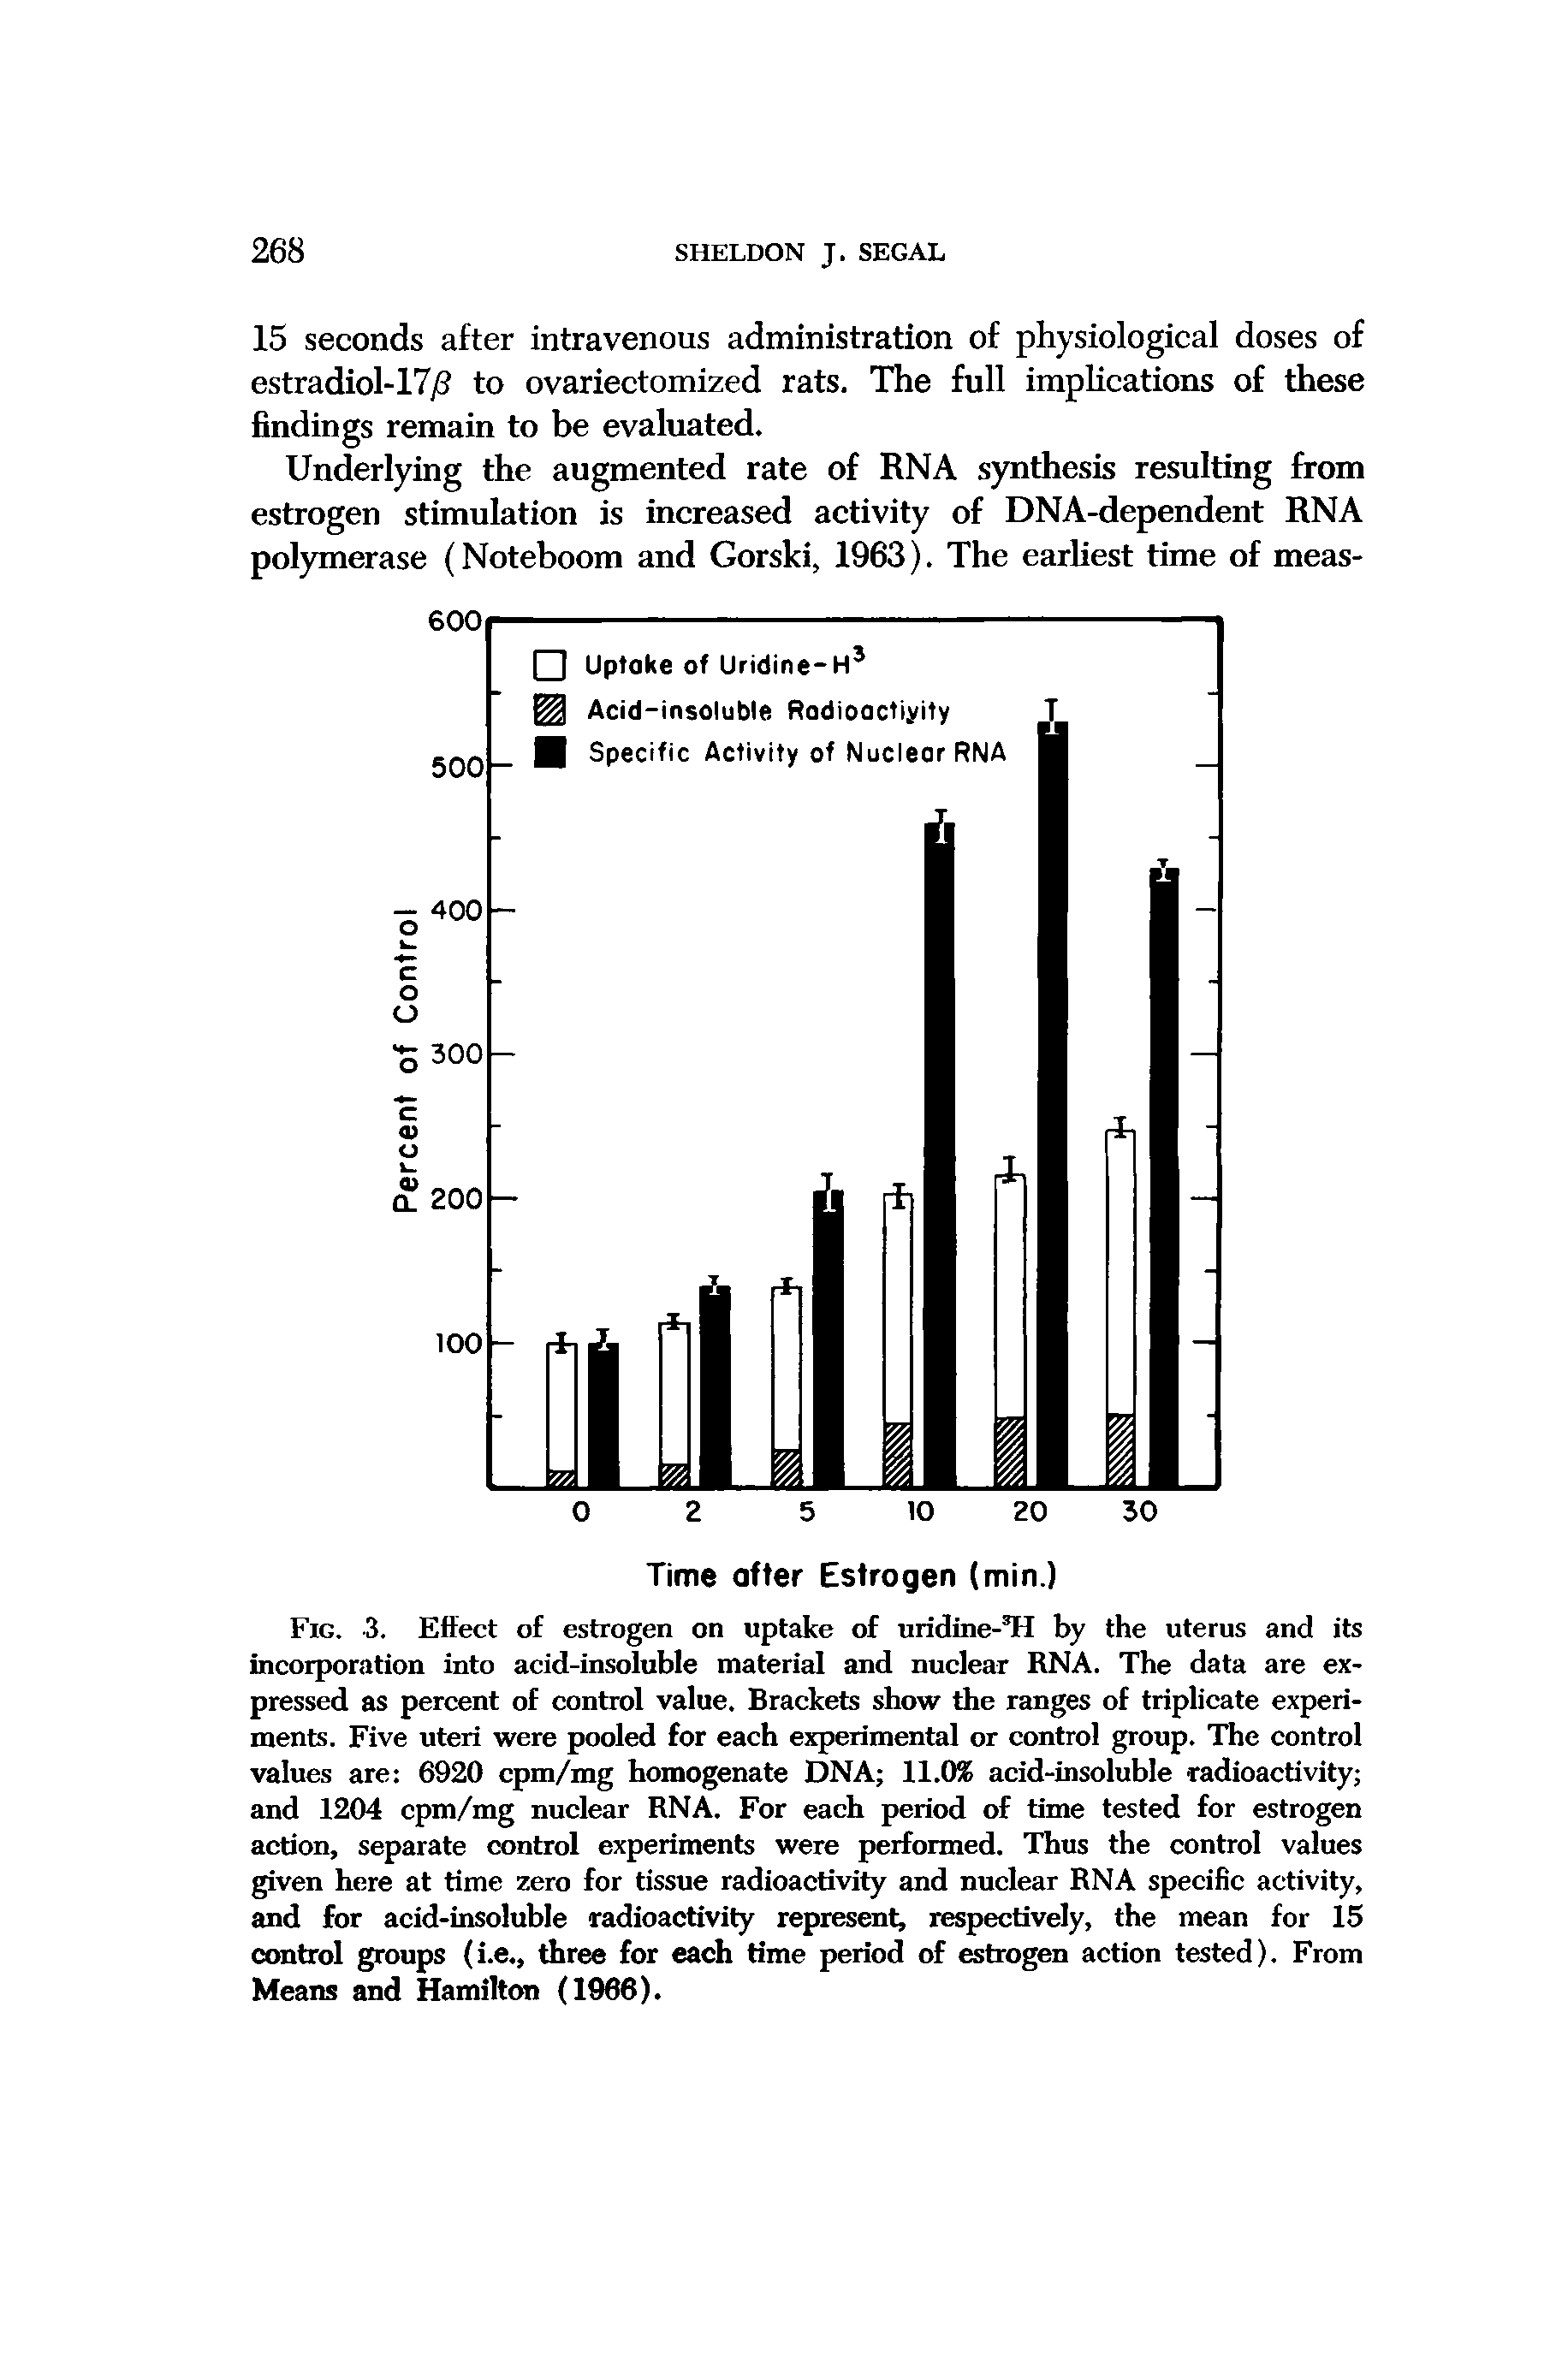 Fig. 3. Effect of estrogen on uptake of uridine-Tl by the uterus and its incorporation into acid-insoluble material and nuclear RNA. The data are expressed as percent of control value. Brackets show the ranges of triplicate experiments. Five uteri were pooled for each experimental or control group. The control values are 6920 cpm/mg homogenate DNA 11.0% acid-insoluble radioactivity and 1204 cpm/mg nuclear RNA. For each period of time tested for estrogen action, separate control experiments were performed. Thus the control values given here at time zero for tissue radioactivity and nuclear RNA specific activity, and for acid-insoluble radioactivity represent, respectively, the mean for 15 control groups (i.e., three for each time period of estrogen action tested). From Means and Hamilton (1966).